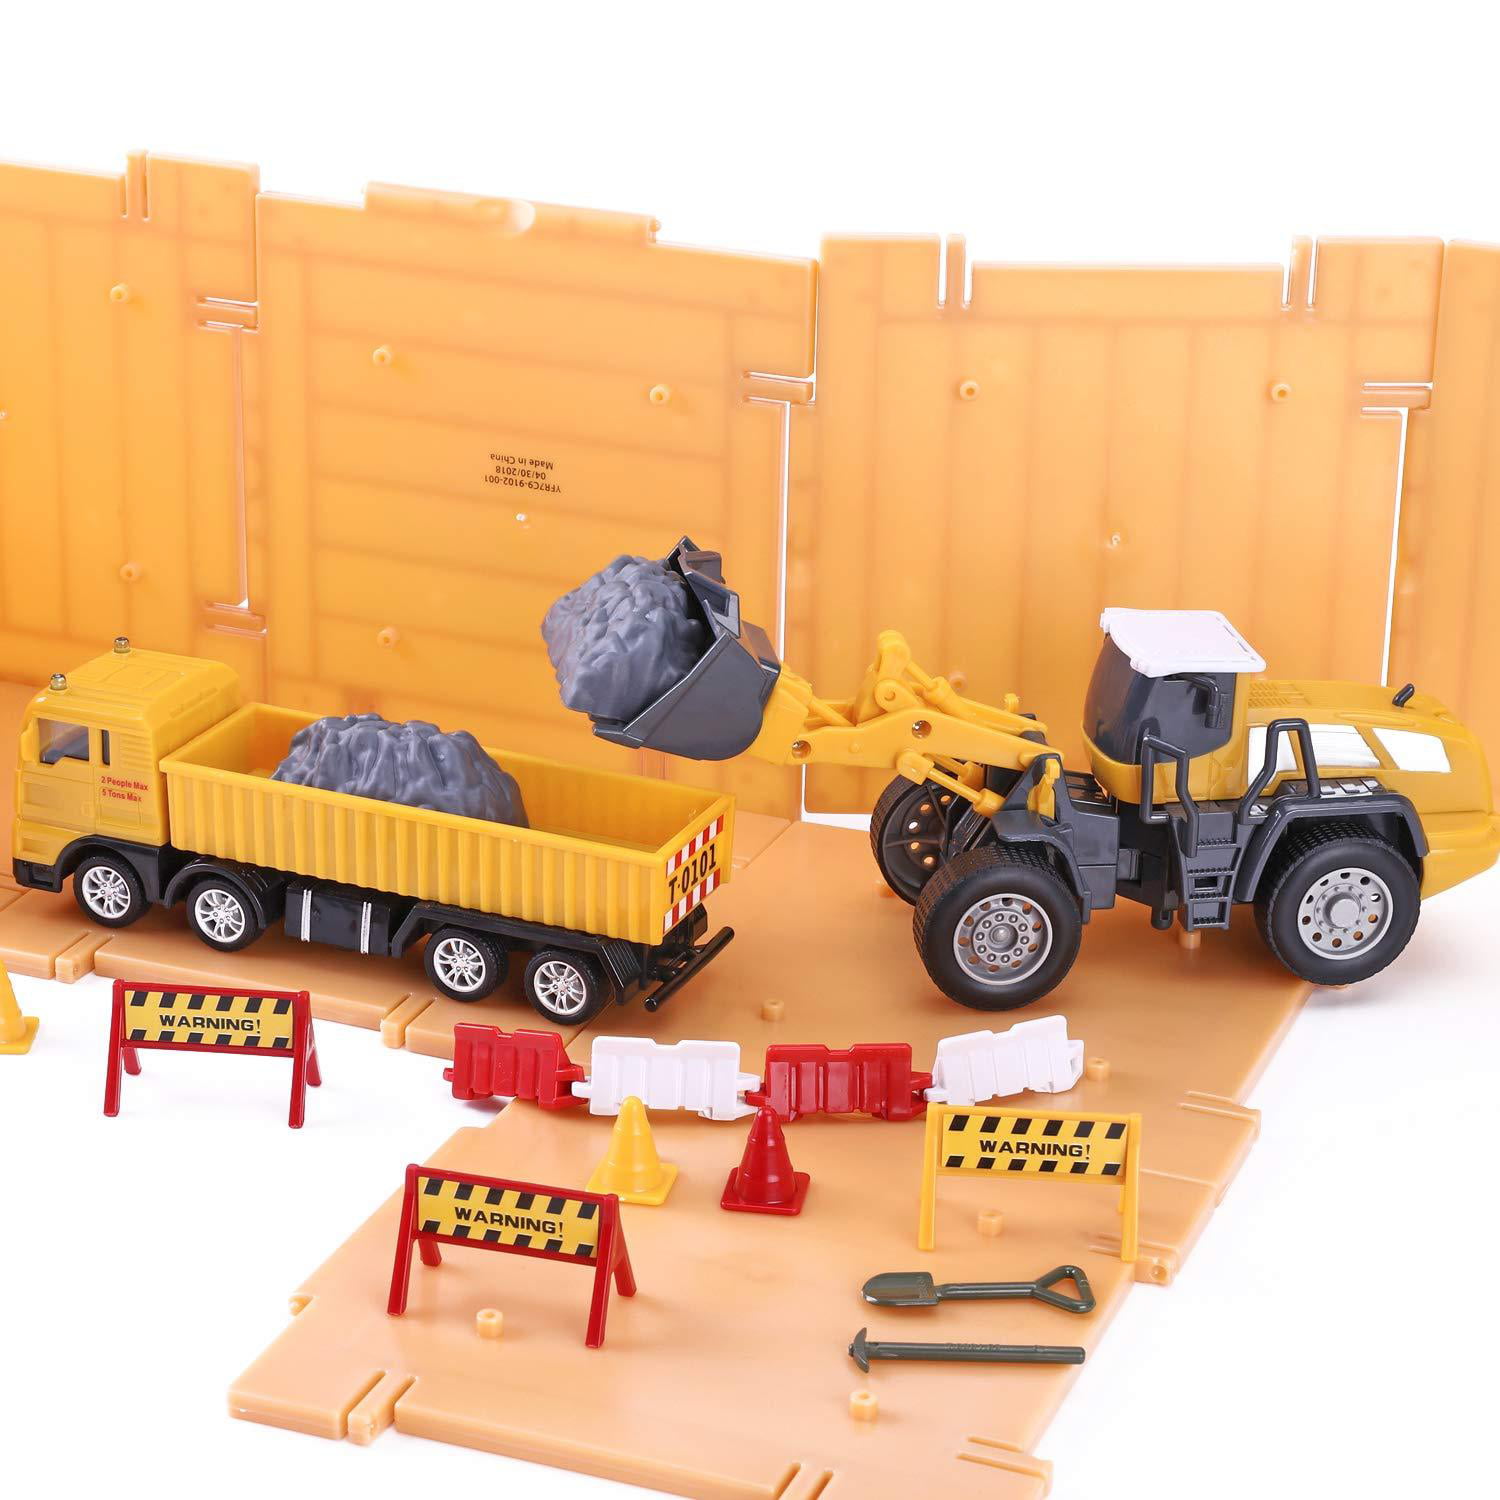 iPlay iLearn Construction Site Vehicles Toy Kids Engineering Playset Gift 